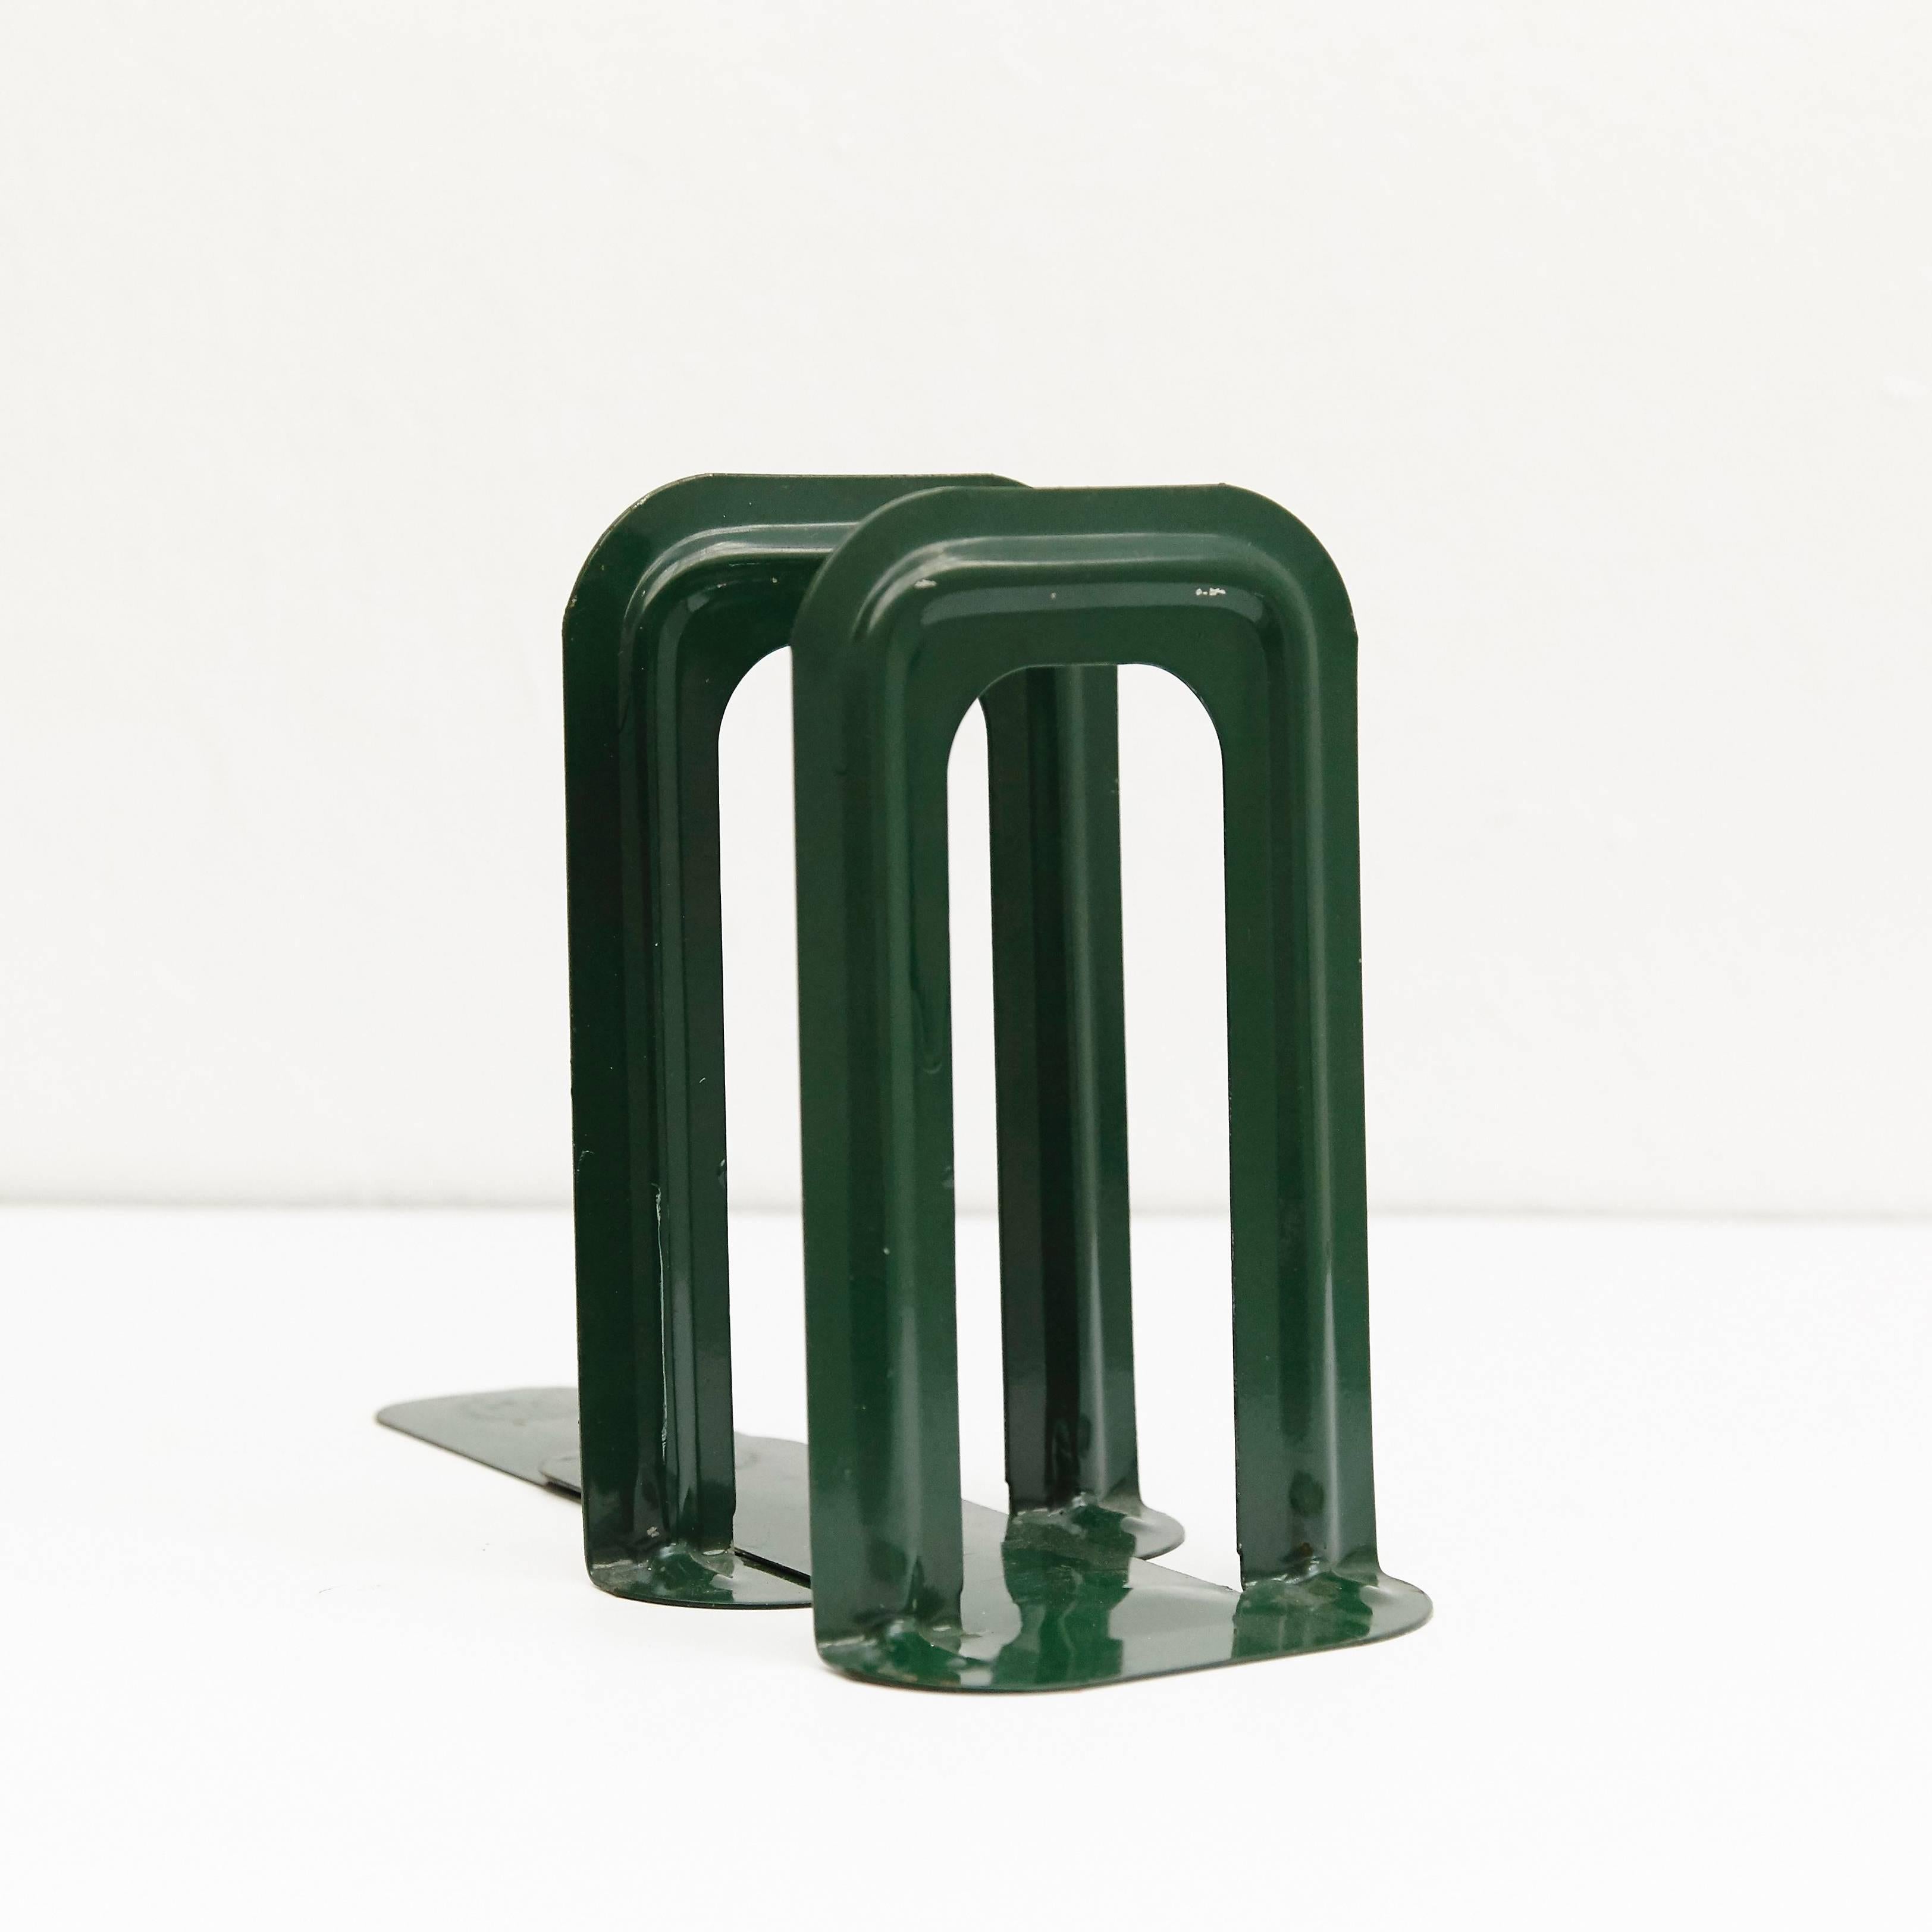 Bookend designed by Bernard-Albin Gras.
Manufactured by Gras (France), circa 1905.
Lacquered metal. Bottle green and grey.

GRAS RAVEL metal stamping. 

This set is shown and referenced on page 37 in the book 'lampe GRAS didier